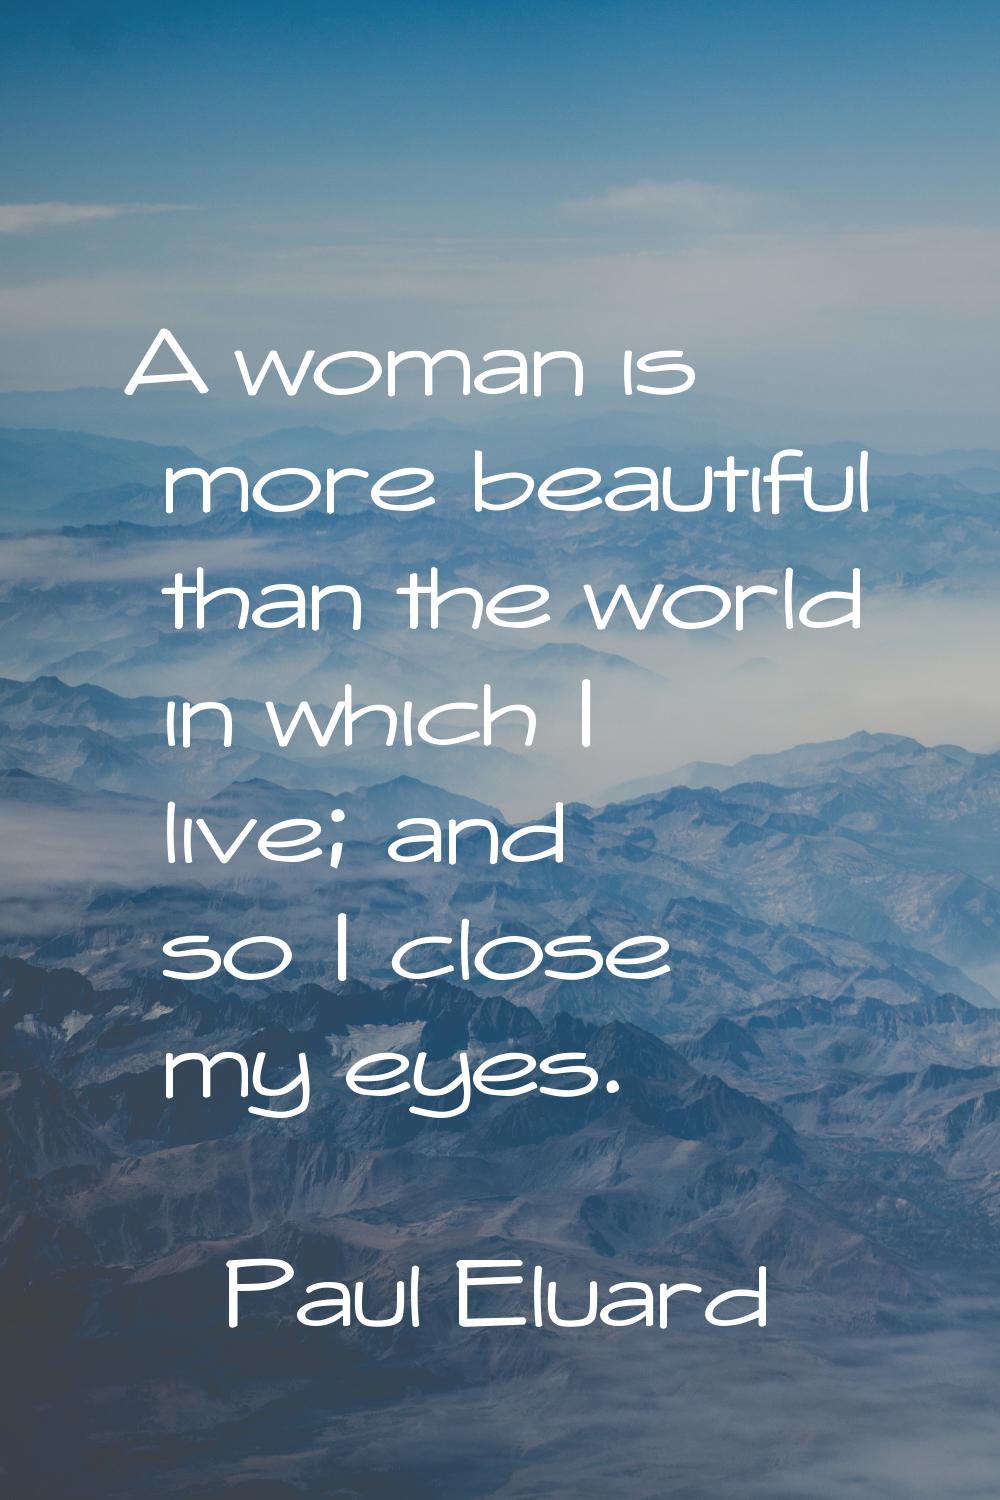 A woman is more beautiful than the world in which I live; and so I close my eyes.